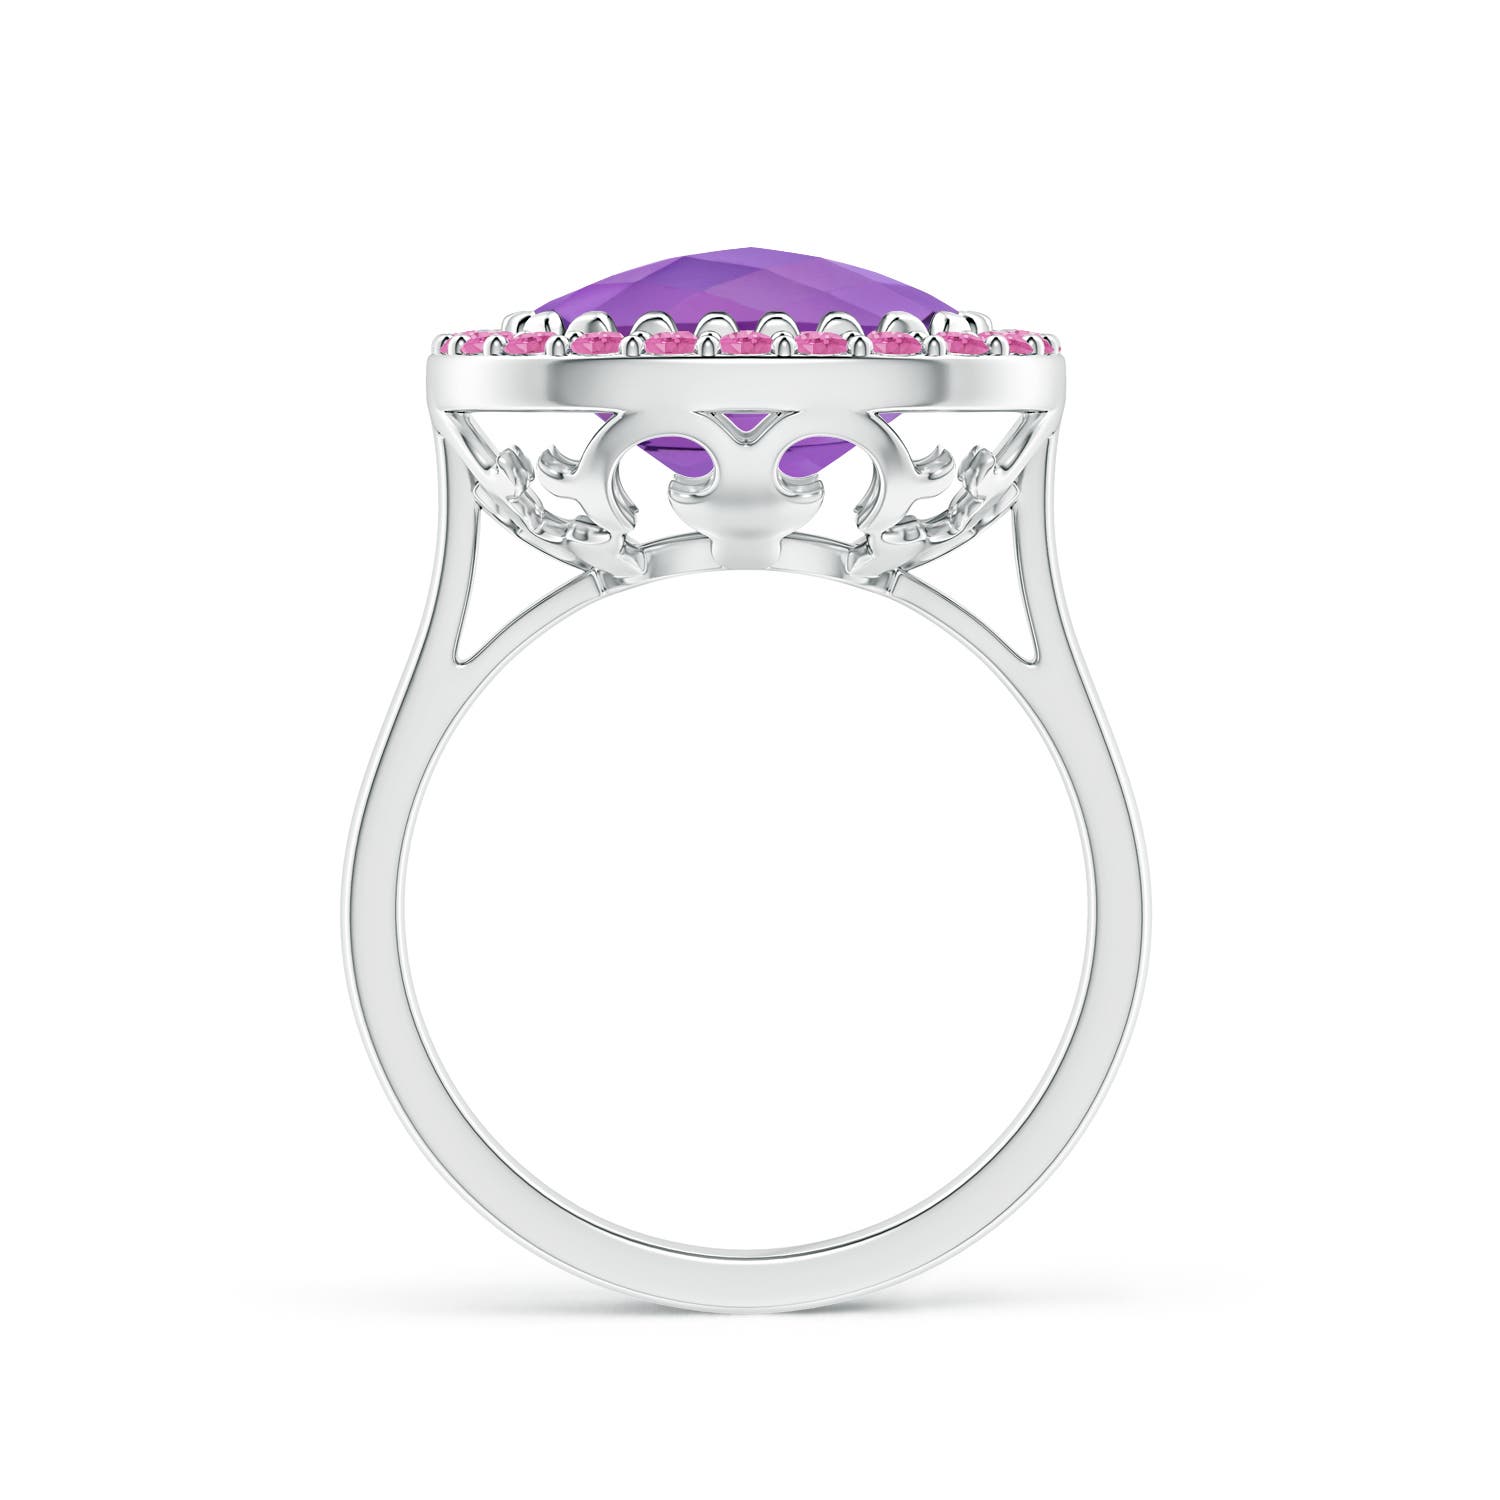 AA - Amethyst / 5.4 CT / 14 KT White Gold